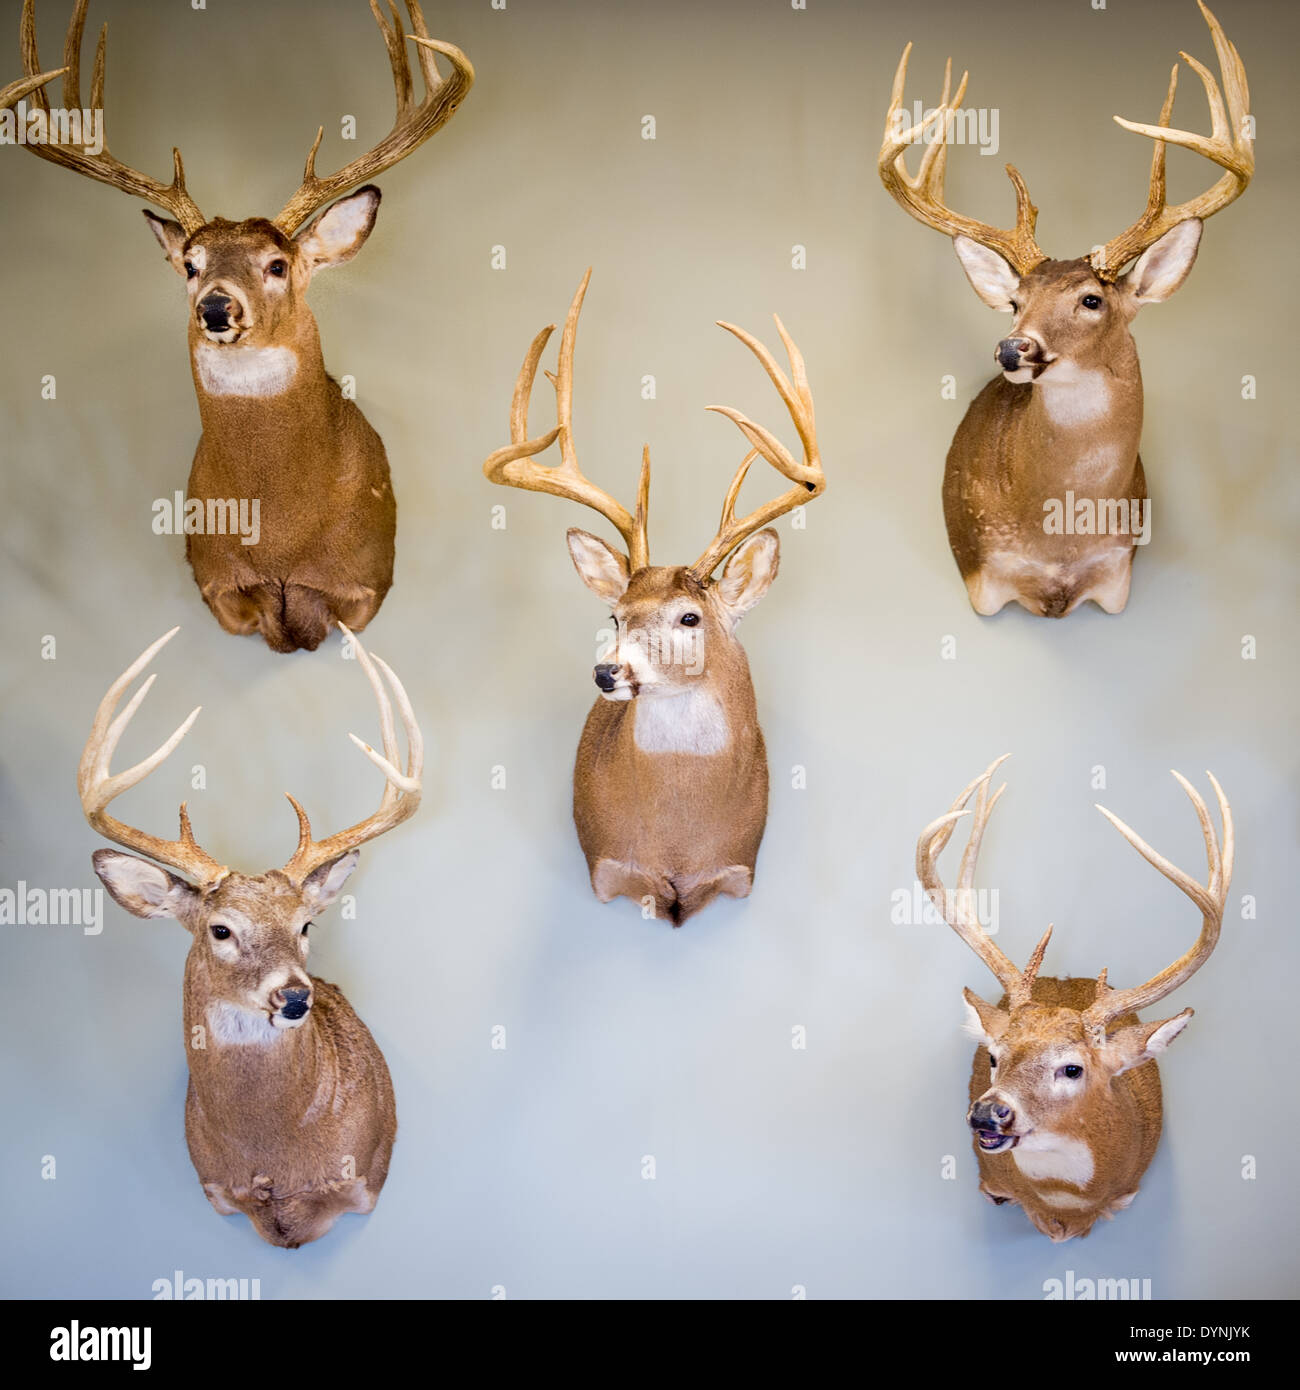 Discover more than 60 deer head mount poses